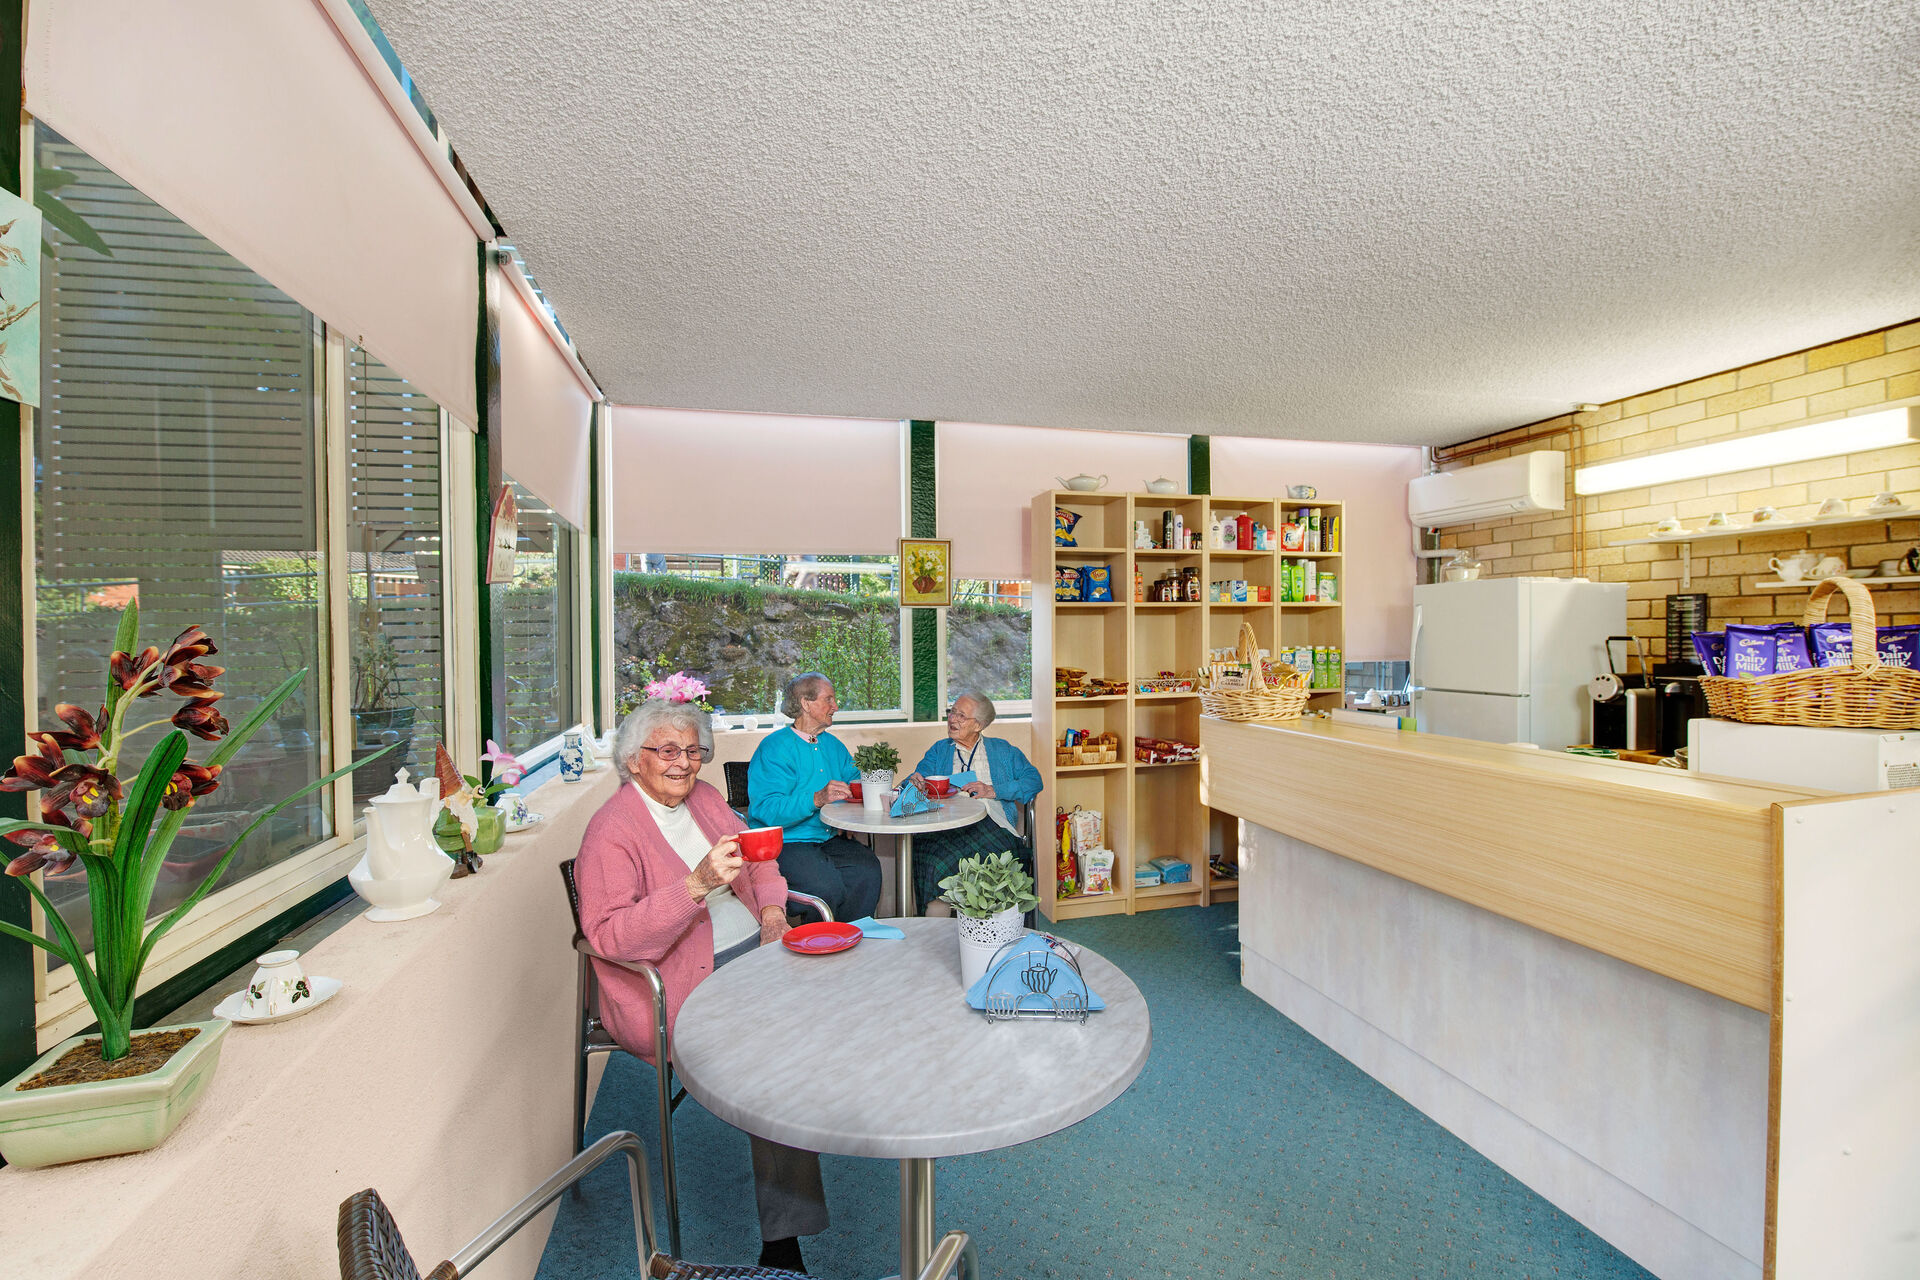 communal sitting space for aged care residents to socialise at baptistcare cooinda court residential aged care home in macquarie park